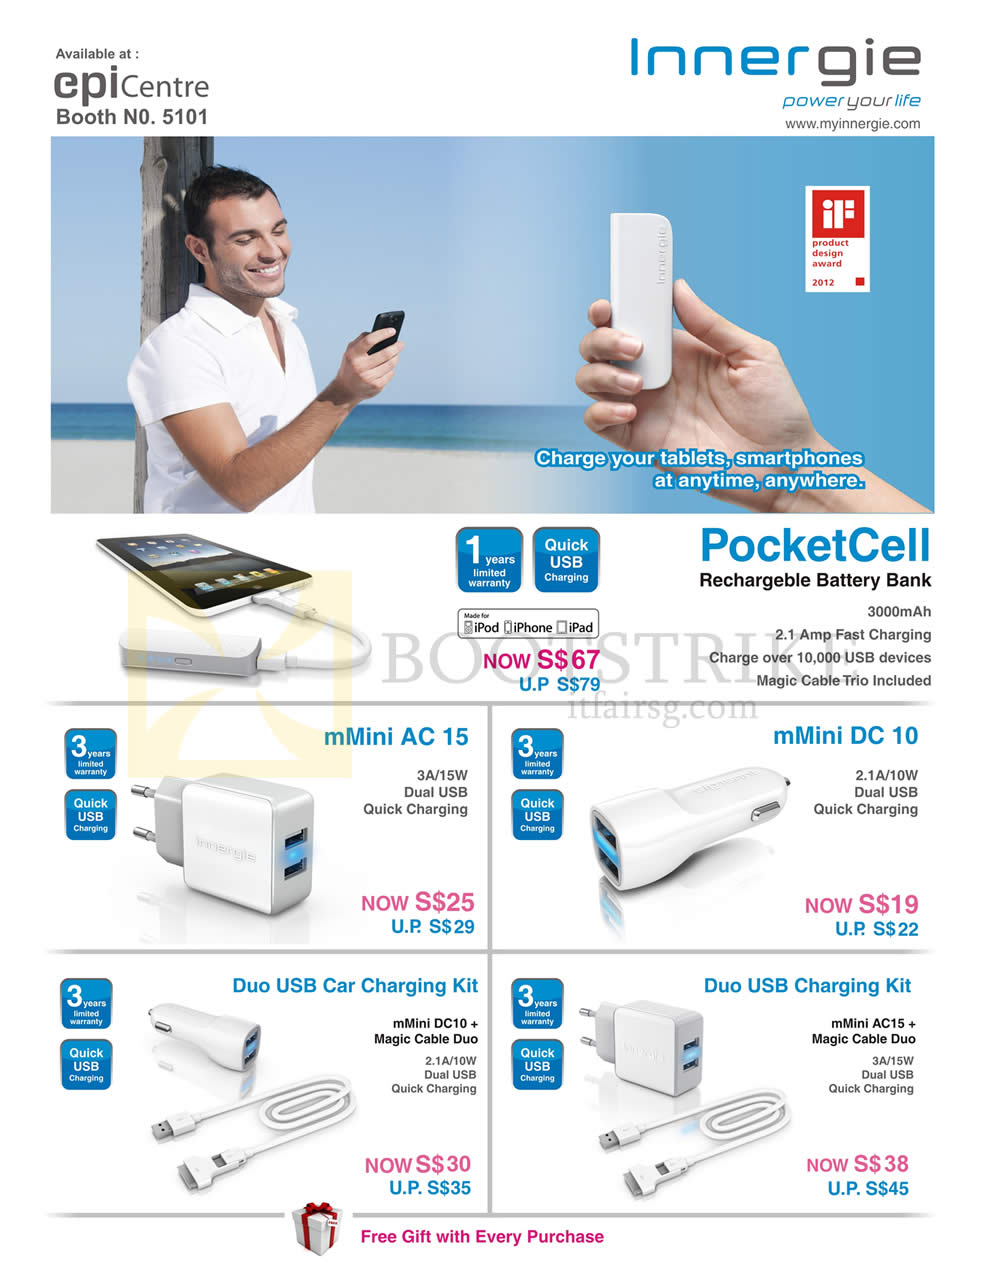 COMEX 2013 price list image brochure of Epicentre Innergie External Chargers PocketCell, MMini AC15, DC10, Duo USB Car Charging Kit, Magic Cable Duo